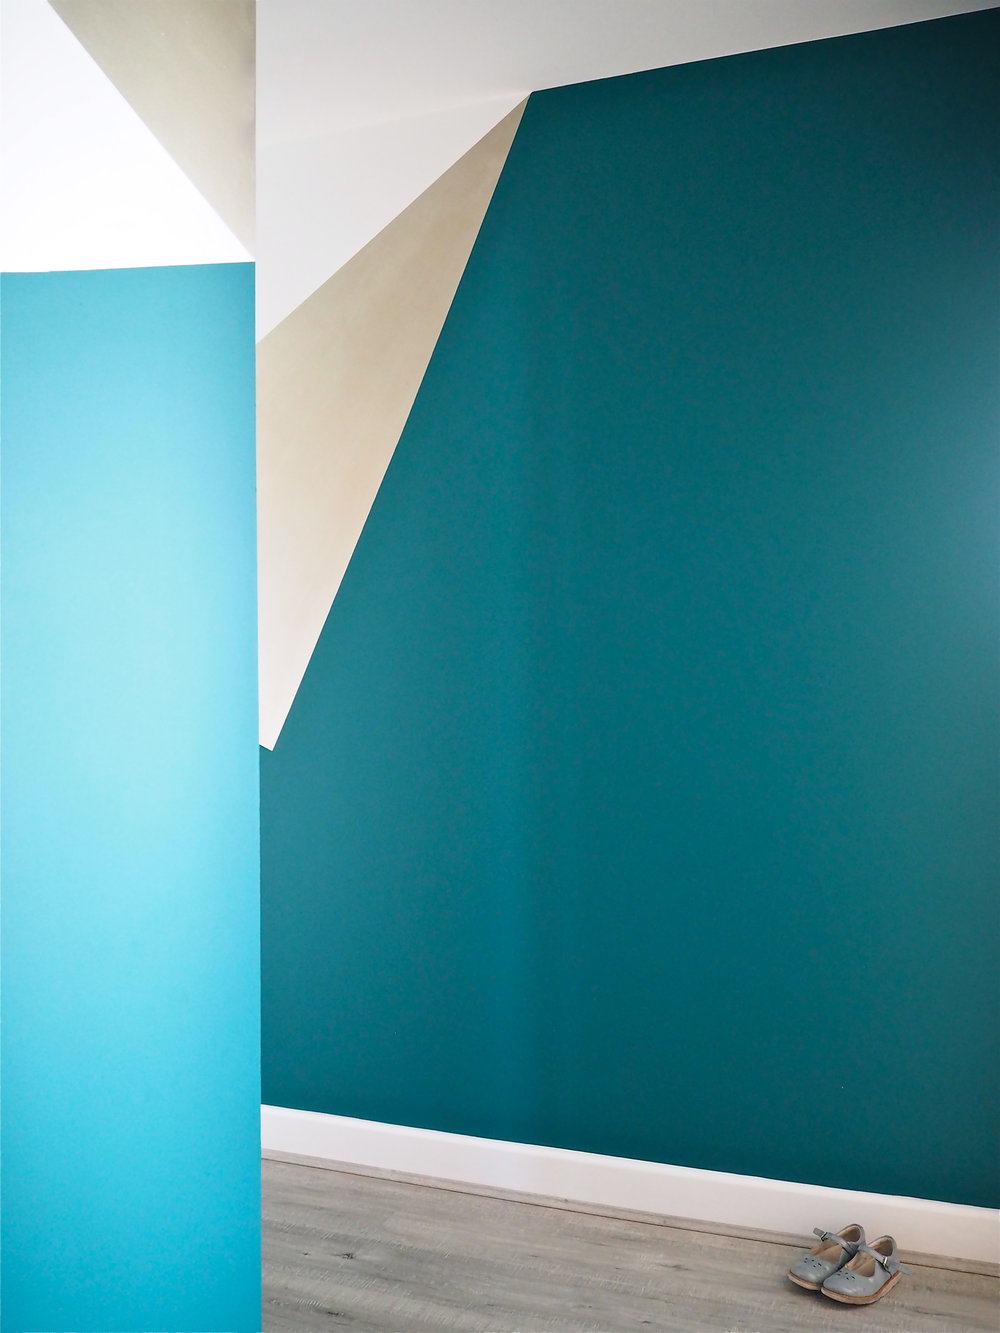 Creating A Gold Teal Geometric Paint Effect In A Hallway MELANIE